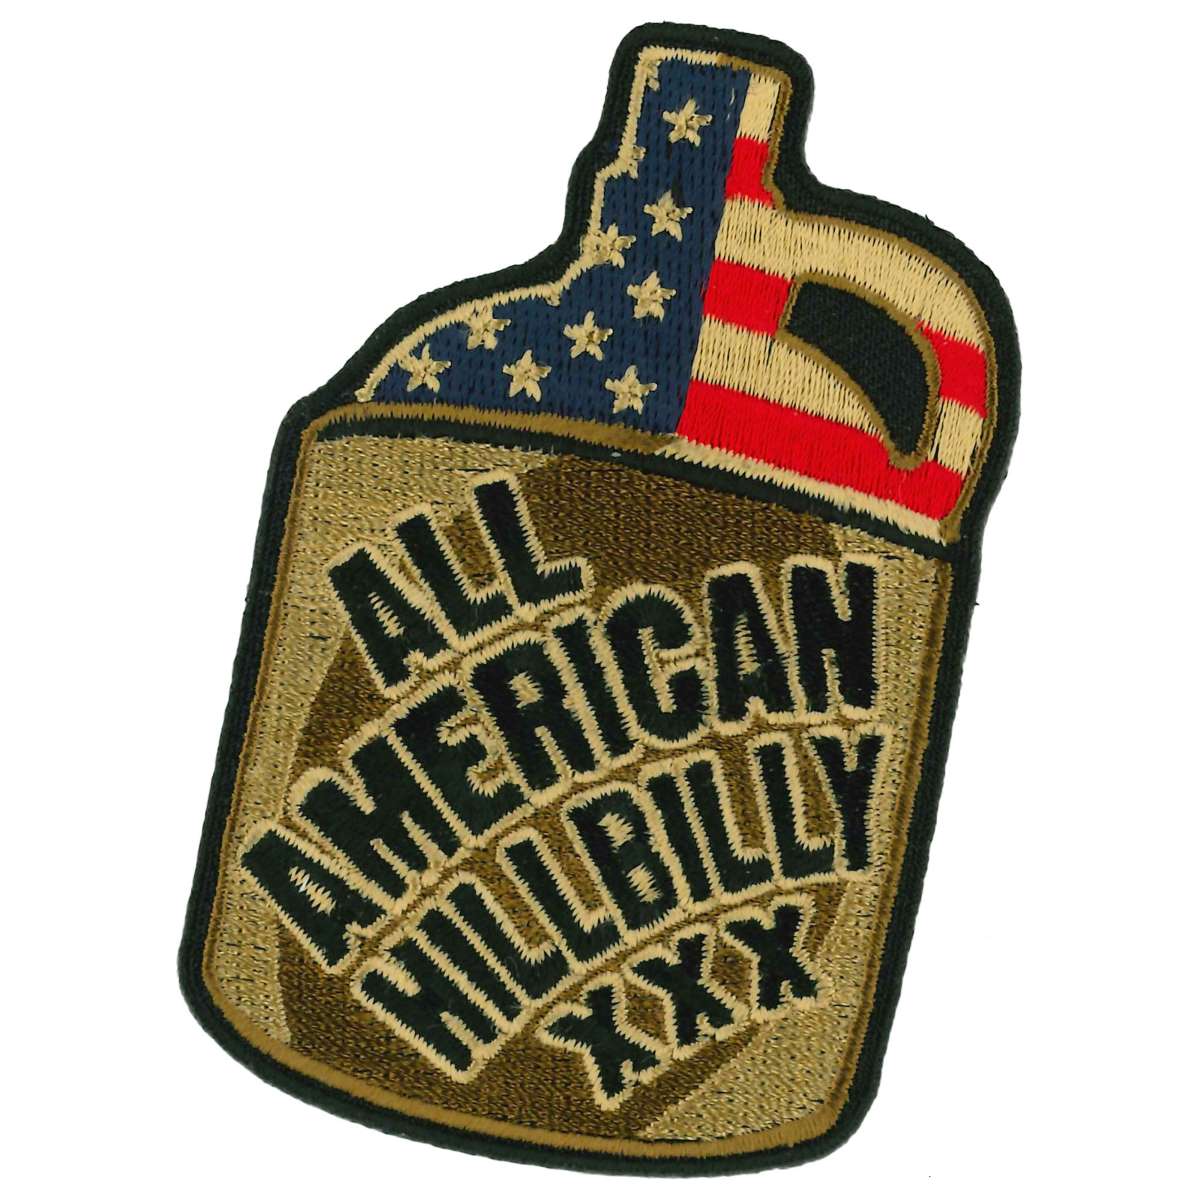 Hot Leathers All American Hillbilly 3.5" Patch PPQ1900